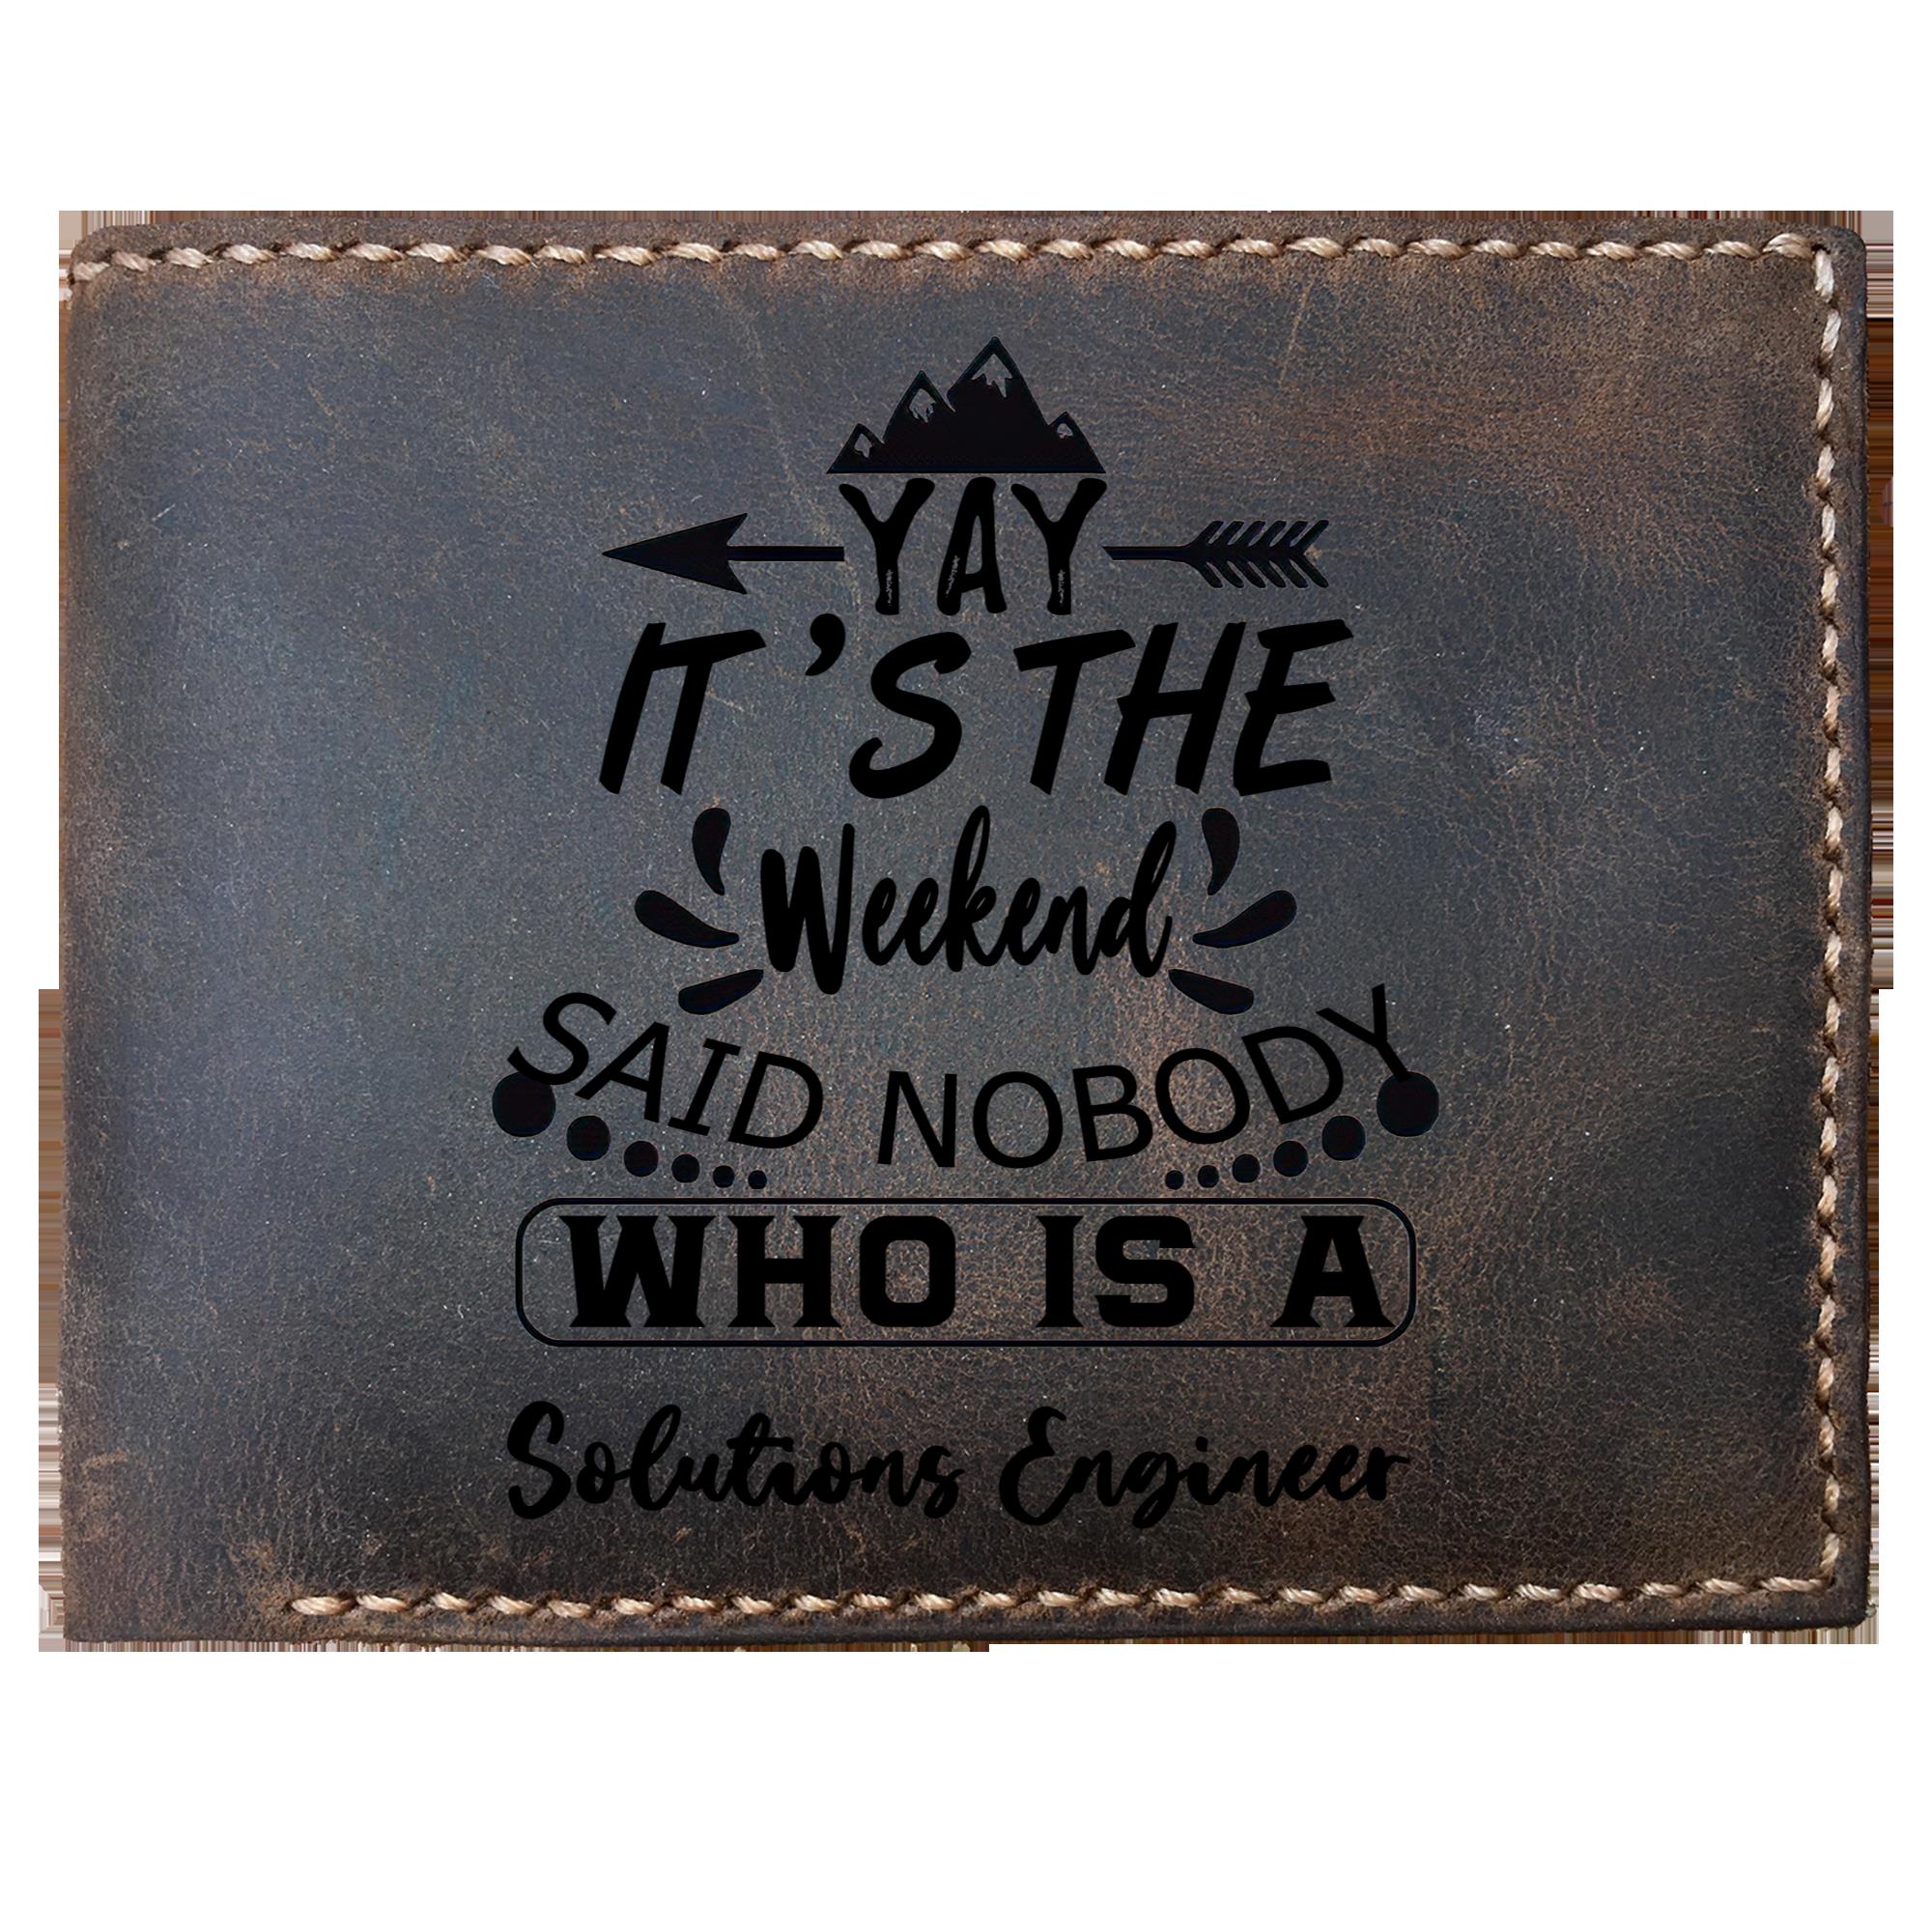 Skitongifts Funny Custom Laser Engraved Bifold Leather Wallet For Men, It's The Weekend Said Nobody Who Is A Solutions Engineer, Father's Day Gifts